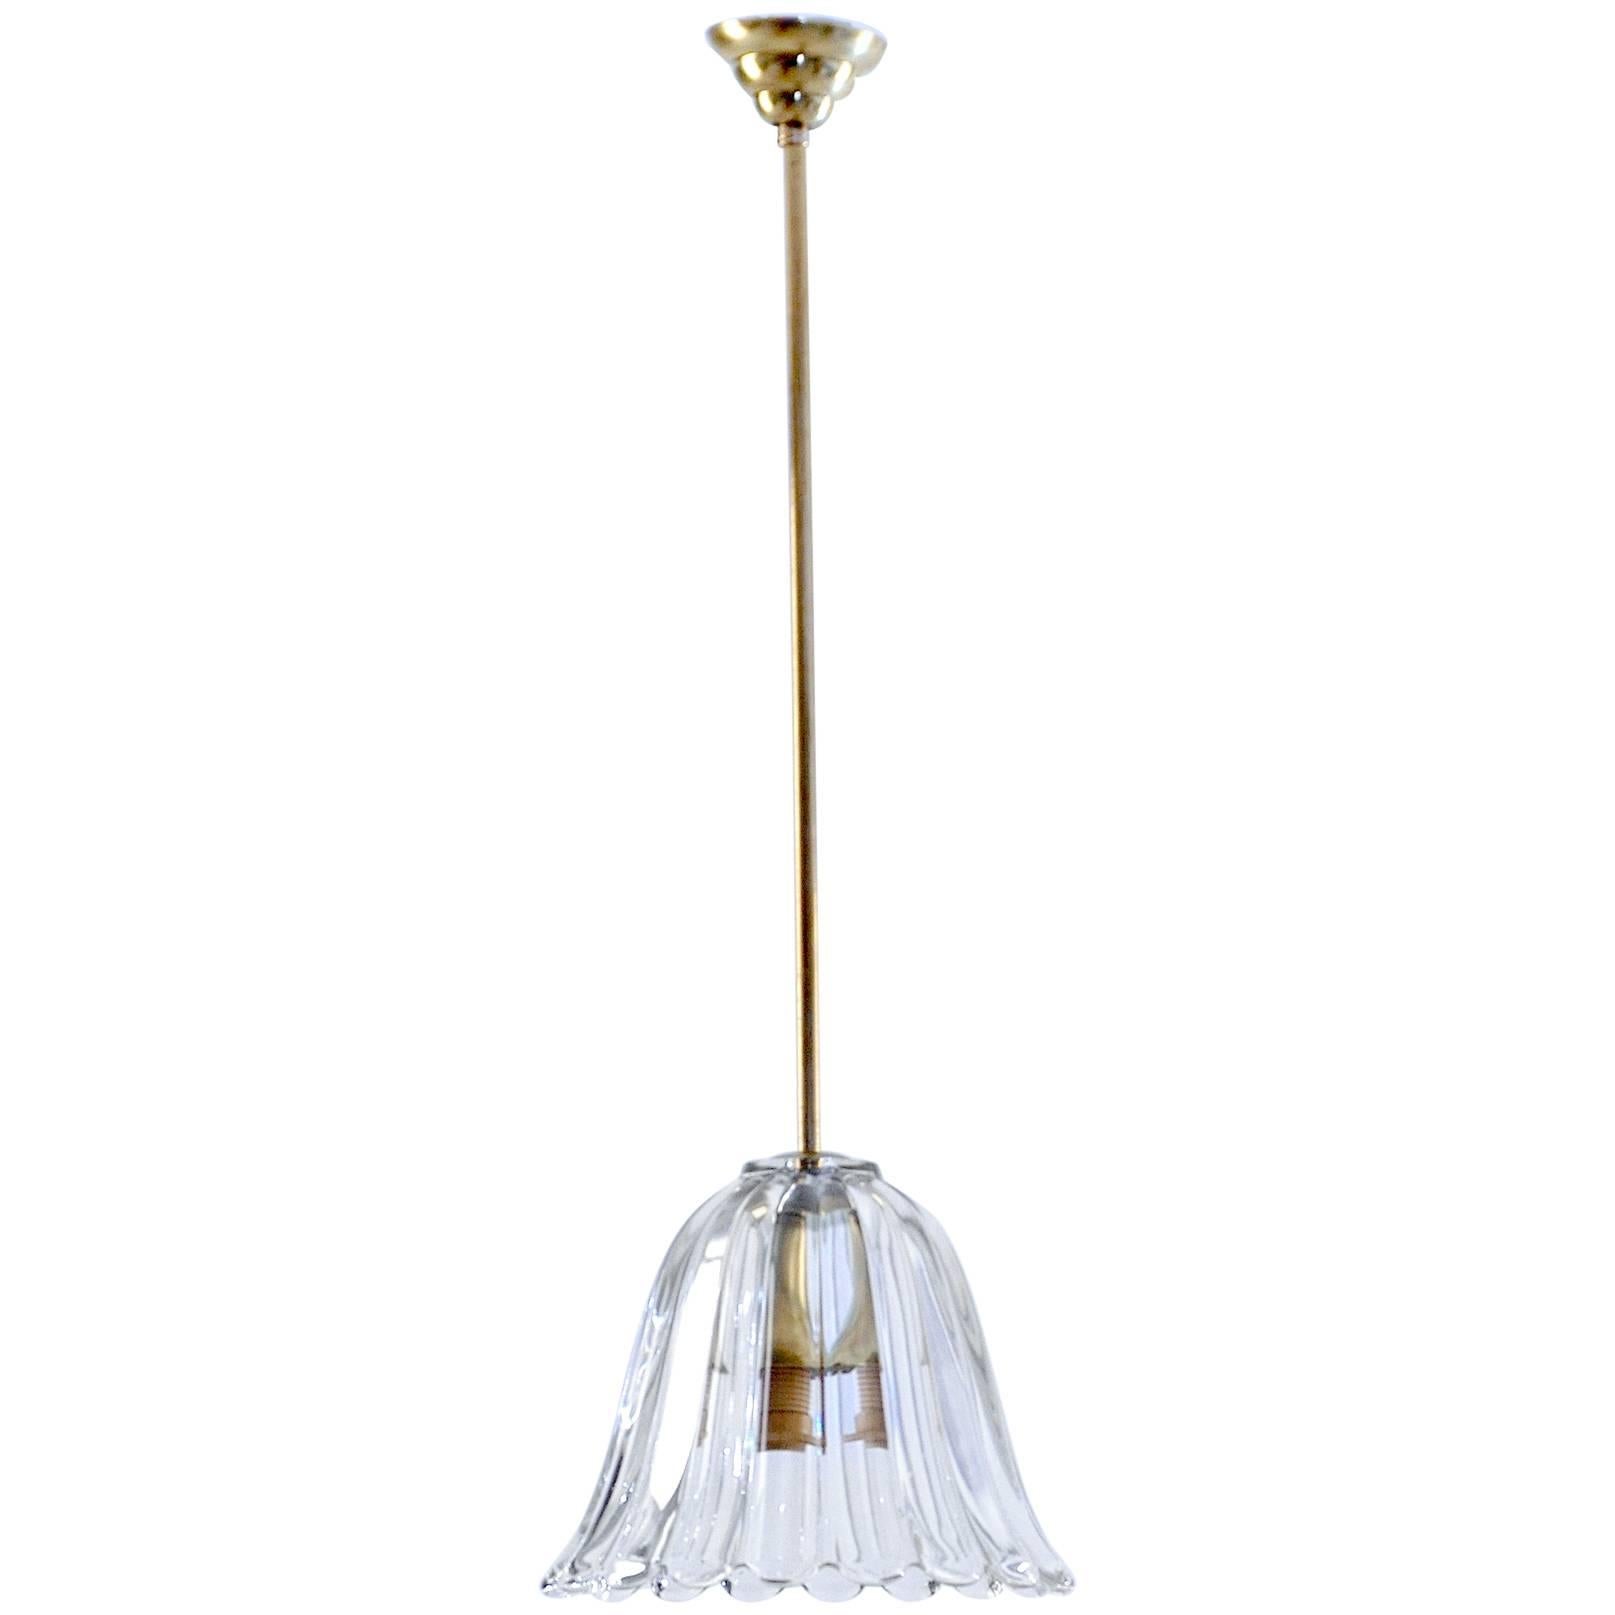 Barovier & Toso Ceiling Light